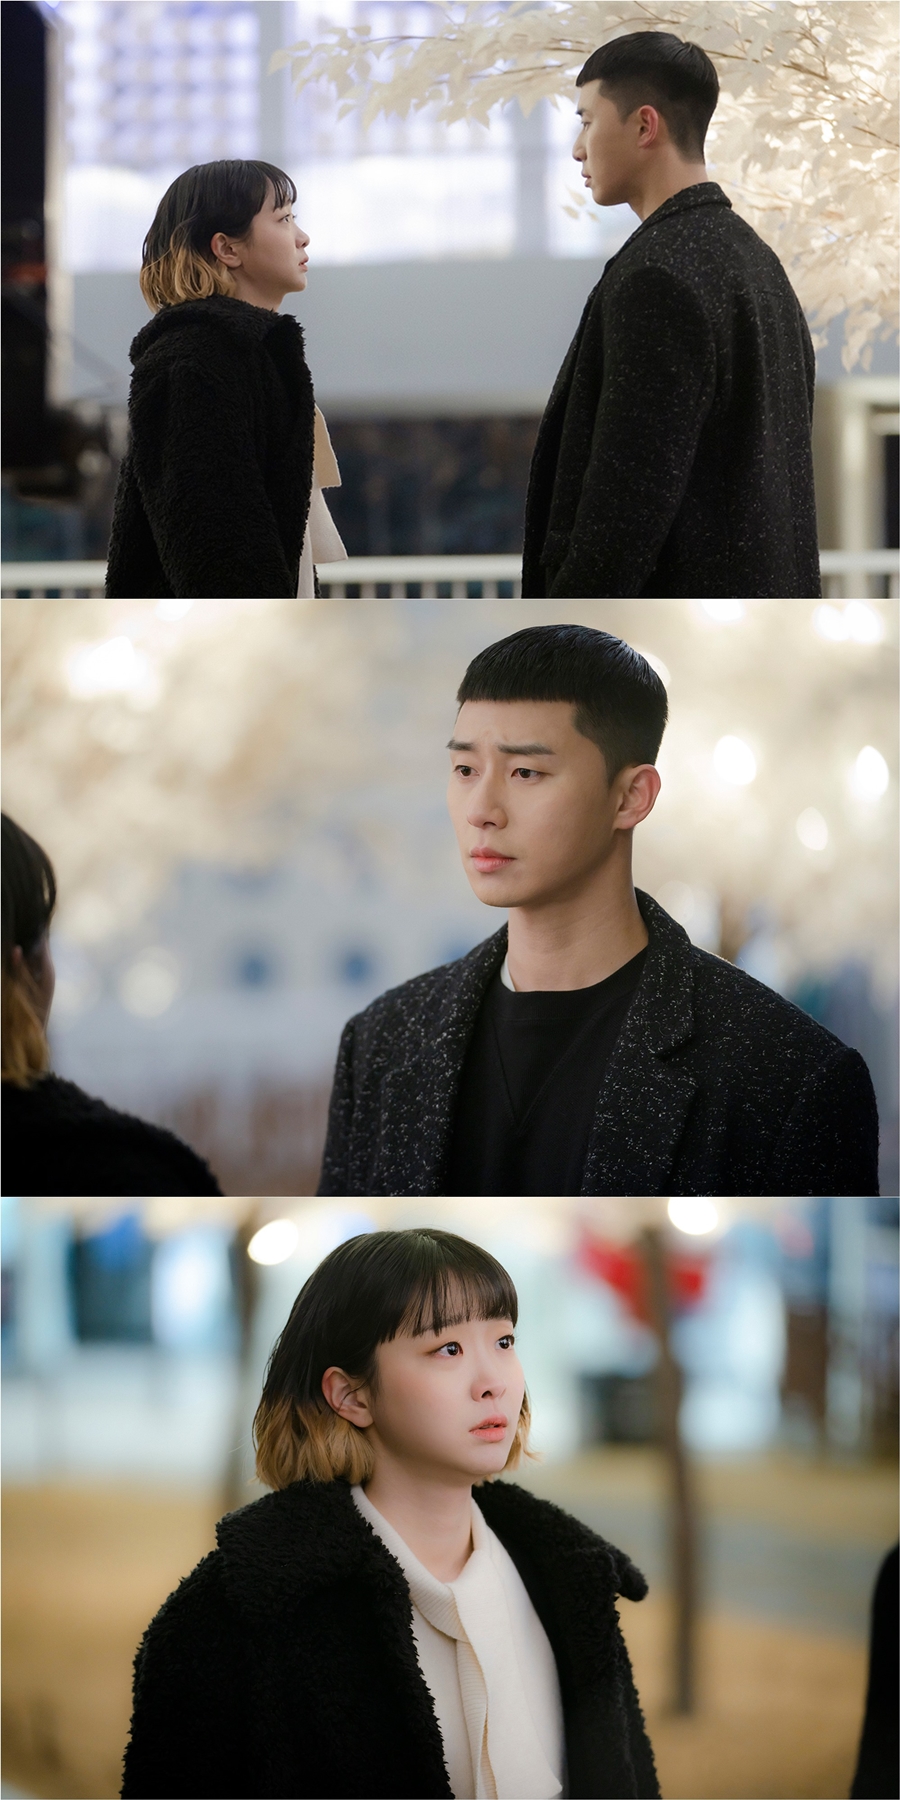 <p> ‘Itaewon then write’ Park Seo-joon and Kim Dae-mi of deep eyes perfect this capture was.</p><p>JTBC gold store drama, ‘Itaewon then write’(directing Kim Sung-Yoon, a dimmer picture) side is the 11th broadcast ahead of 6, fond glances with each other for the night birds(Park Seo-joon)and from(Kim Dae-mi), look to the public.</p><p>Public photo belongs to Joeys sad eyes into it. The tears and the trunk with the box and new this and thats what the curiosity stimulating. To Night new is the expression of the complex emotions interwoven are questions better.</p><p>Ahead of the public 11 times in trailer in “even once this to girls as seen?”Called Jang Geun-Soo(Kim Dong-hee)of stone fastball questions hesitate that night new, and to avoid the screwing in of a public bar. This itself followed a spiral box new in “love, love”to straight-Confessions is your one in the appearance of two people in the relationship and how changes can be noted.</p><p>6, broadcast 11 times in the most unexpected of chances, just a night sports car of the investments offered are night New, deeply distressed in the fall, on the one hand my heart to know that night new, and due to heartburn which is in The Shape of drawn. First love Oh Soo-Ah(the right one)towards the unchanging heart I had night new, the Joey in the Confessions is his mind to be reversible, this item is focused.</p><p>‘Itaewon then writing’ with the “Joey from night to new, to meet life first love Realize Have. Towards him not the mind the more you cant hide that from the honest and True Confessions is this that going to be the future, as the relationship between two people change, stay tuned to vary”and I was.</p><p>‘Itaewon Club Festival’ 11 to 6: 10 p.m. 50 minutes JTBC on the broadcast.</p>